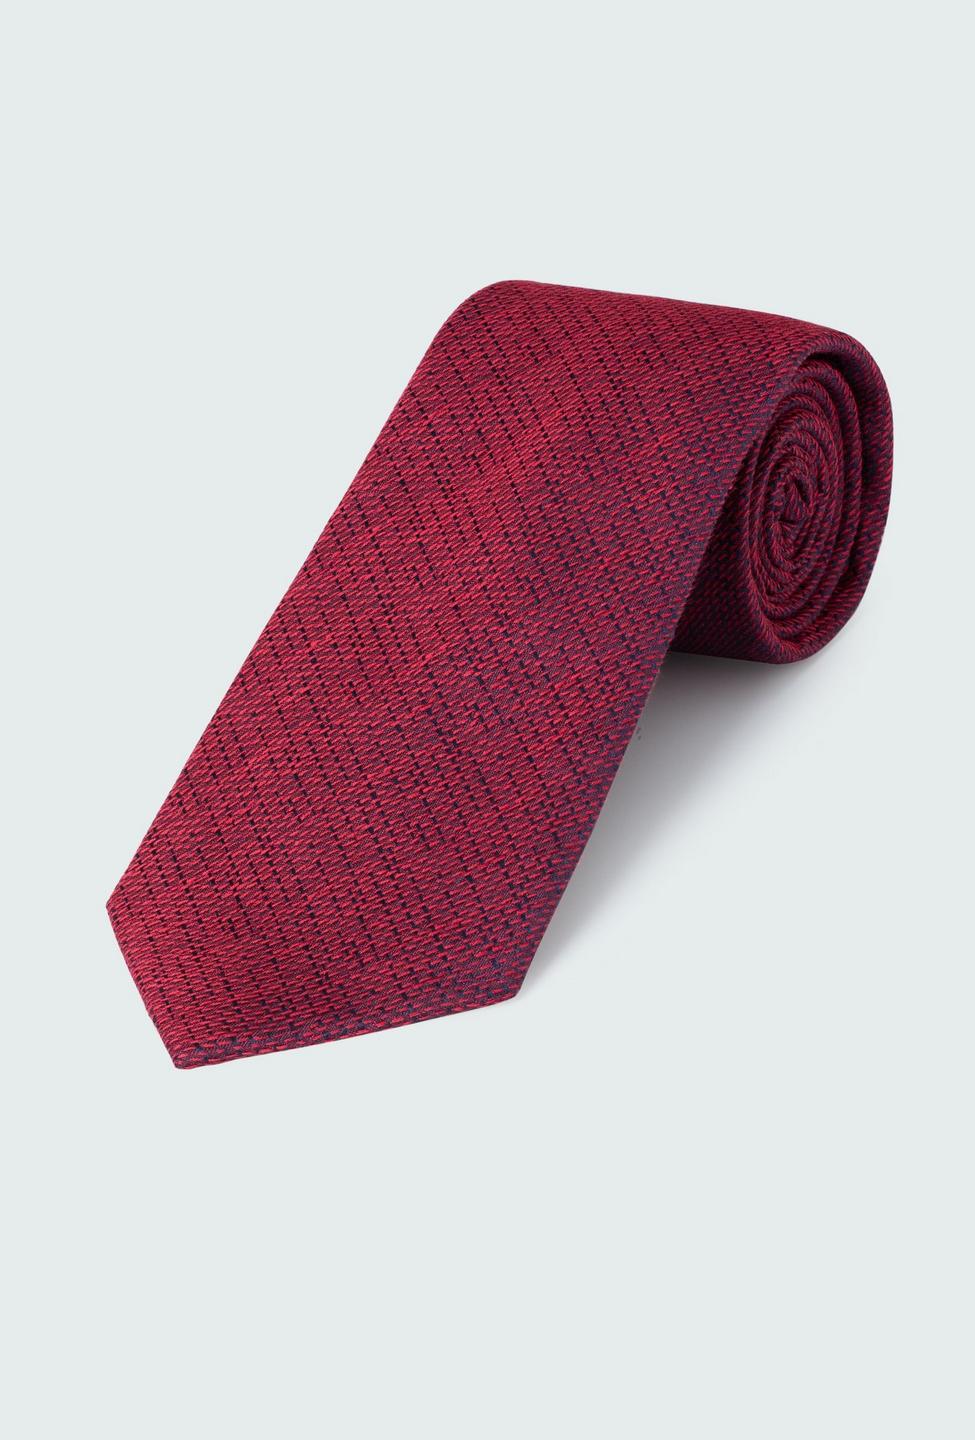 Red tie - Solid Design from Indochino Collection